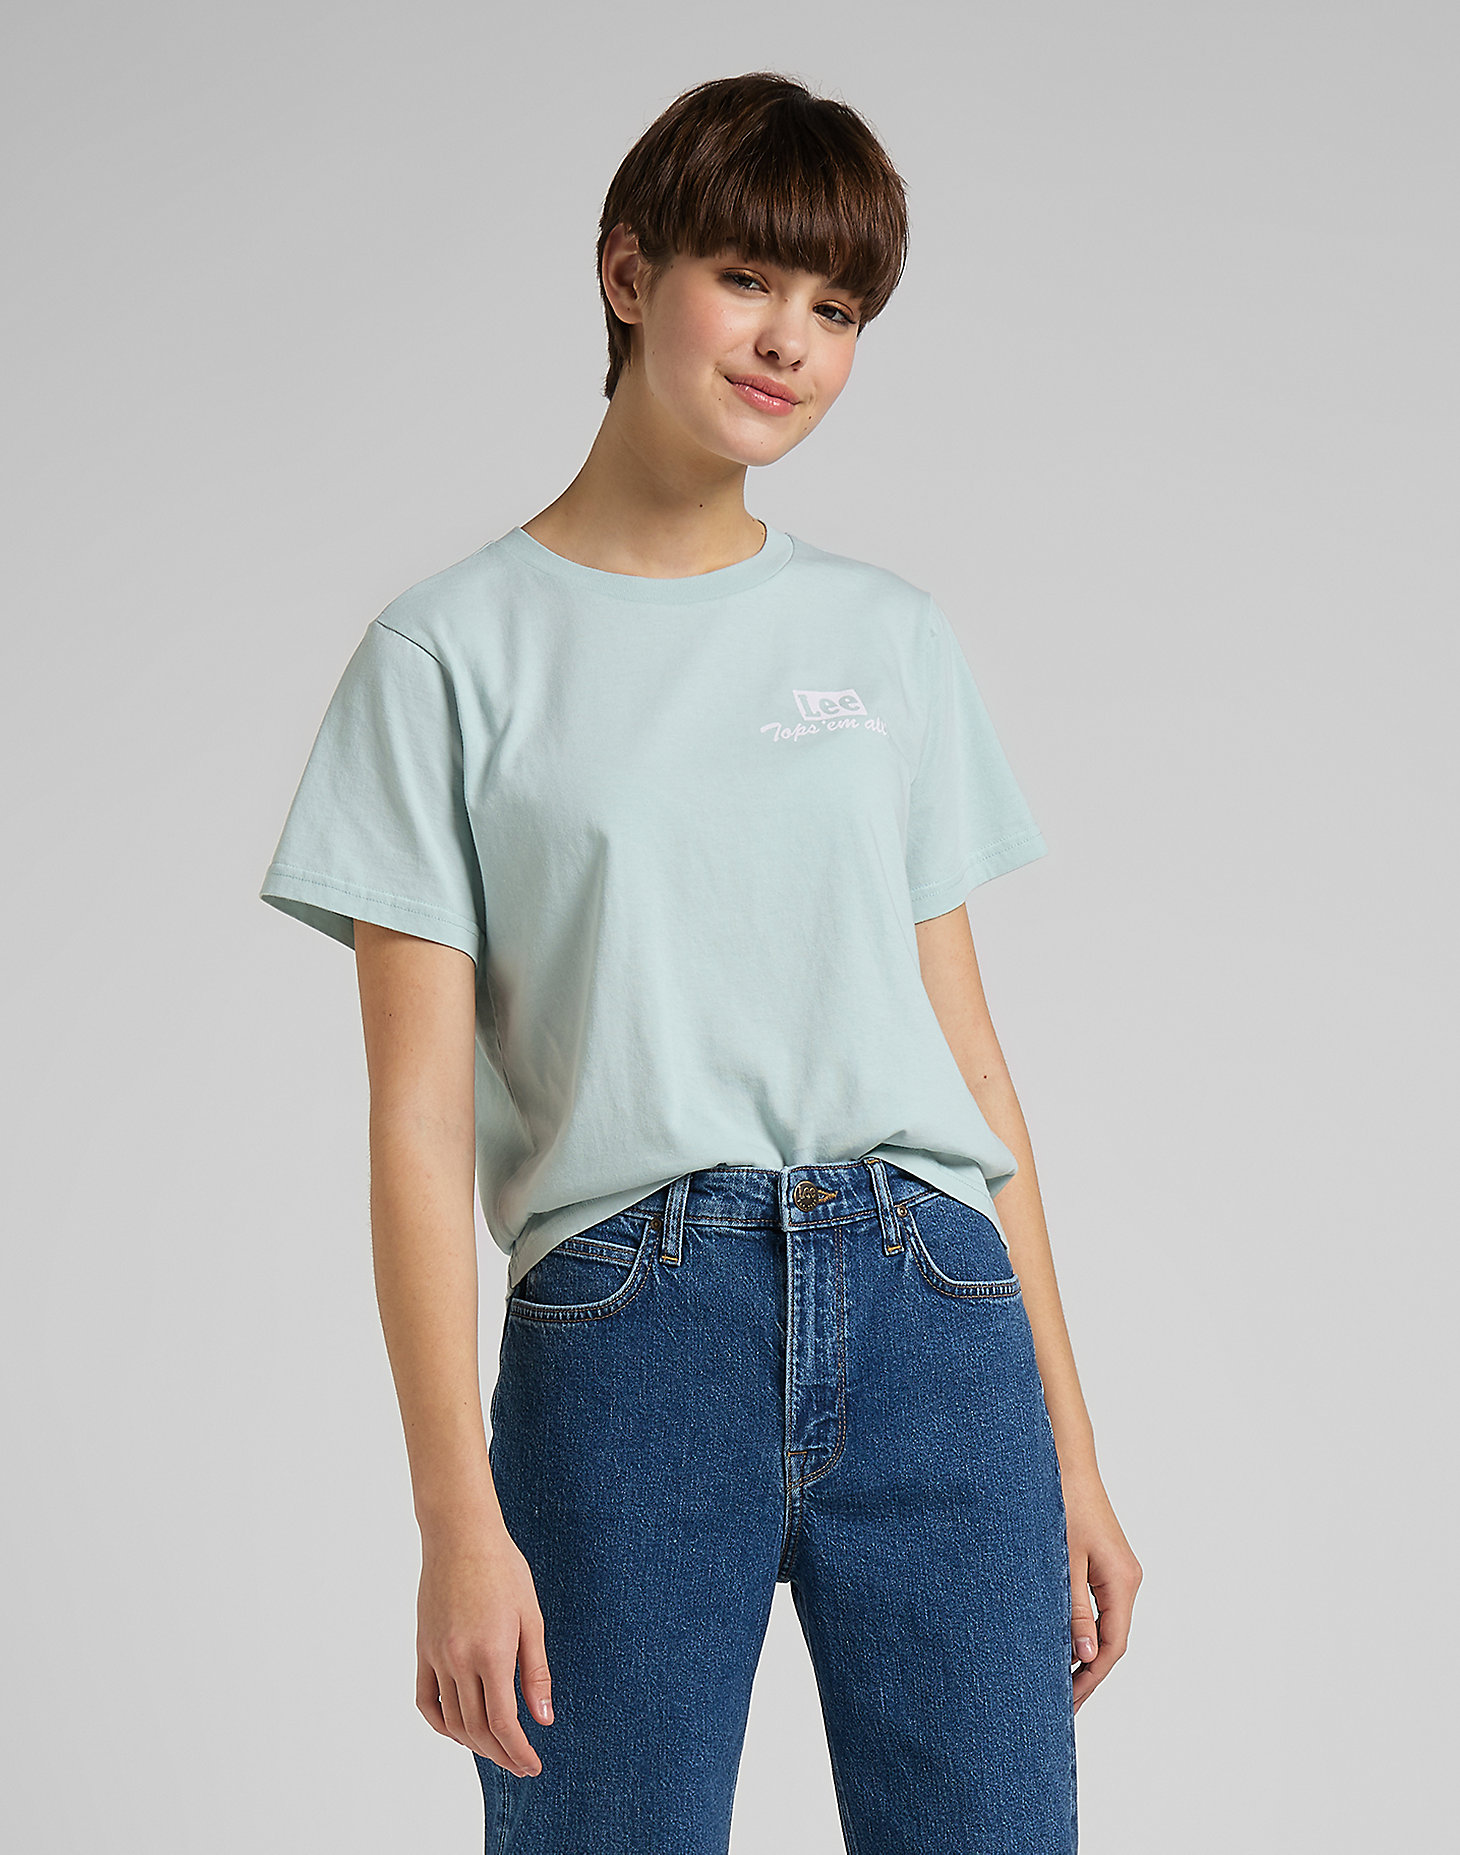 Graphic Tee in Sea Green alternative view 1